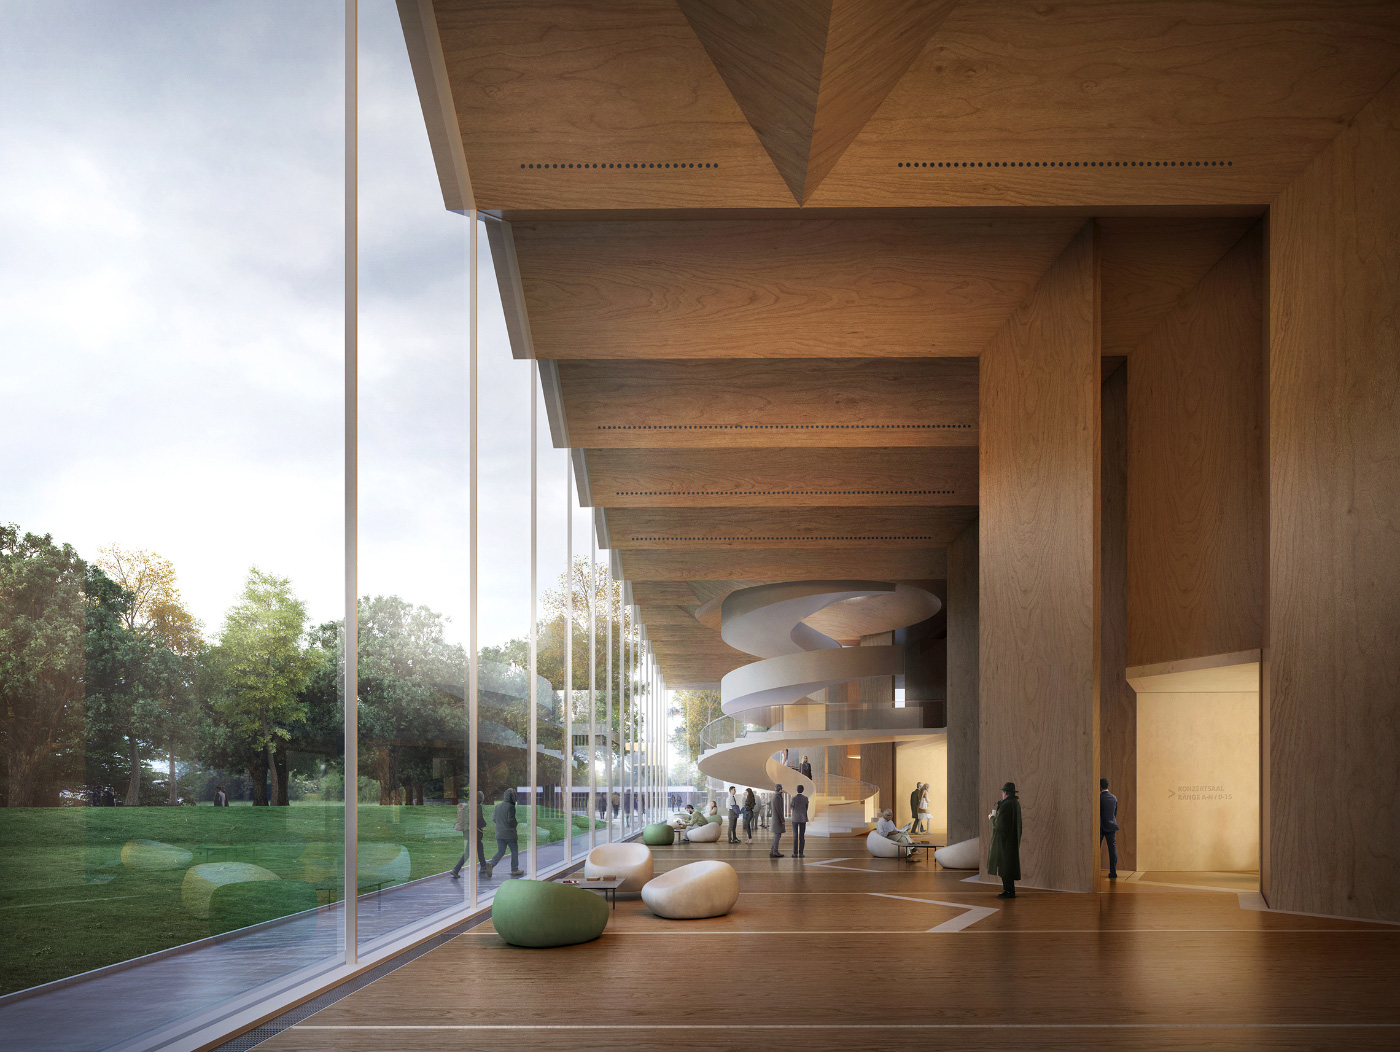 Rendering of a timber concert hall with undulating ceiling